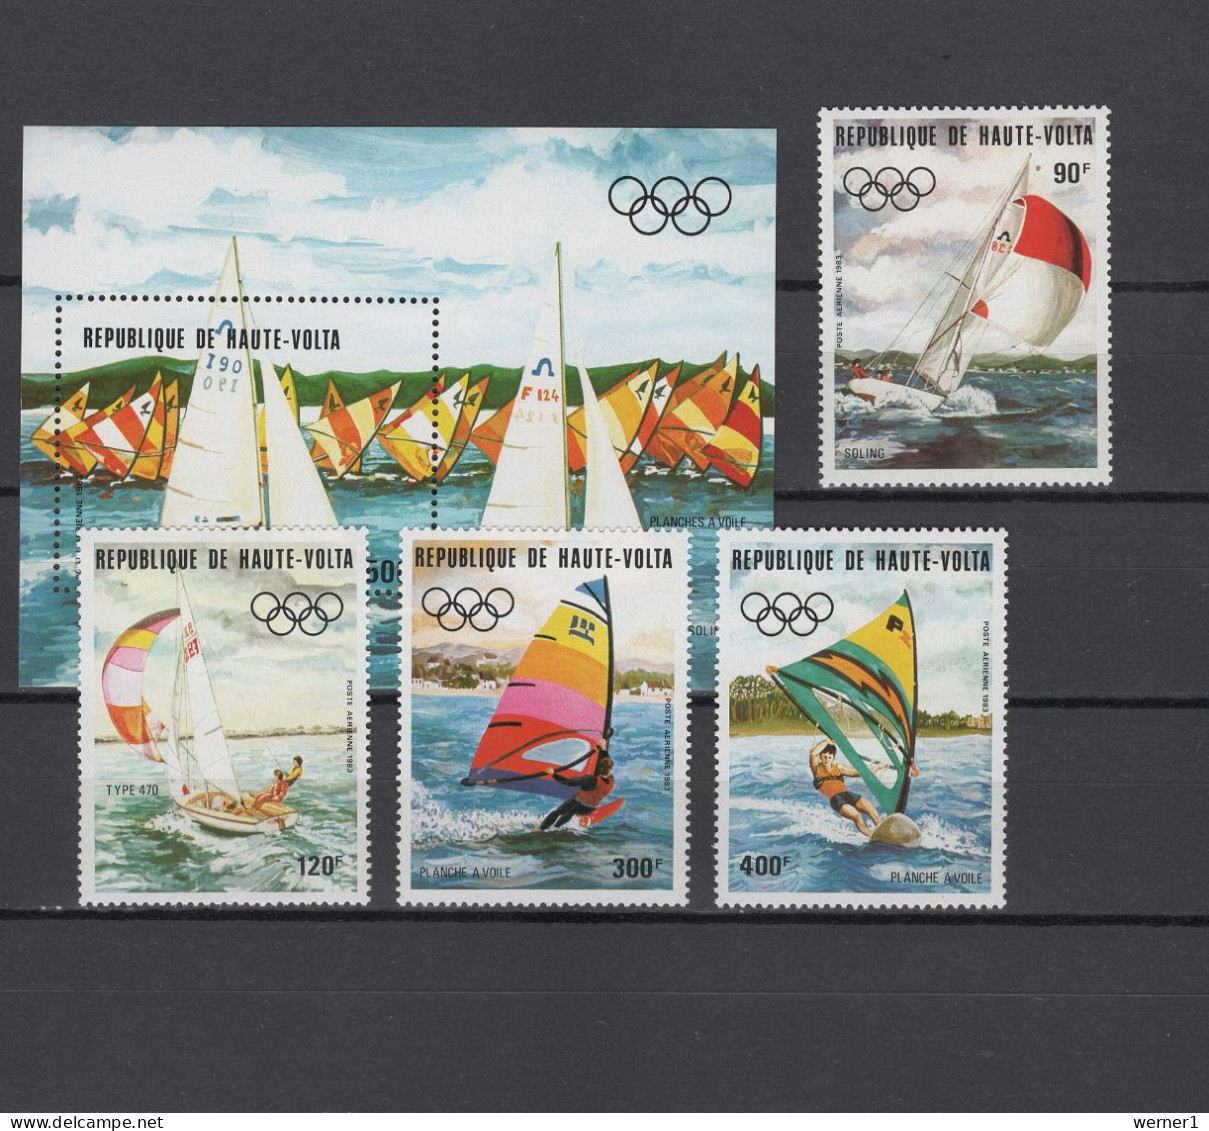 Burkina Faso (Upper Volta) 1983 Olympic Games Los Angeles, Sailing, Windsurfing Set Of 4 + S/s MNH - Sommer 1984: Los Angeles